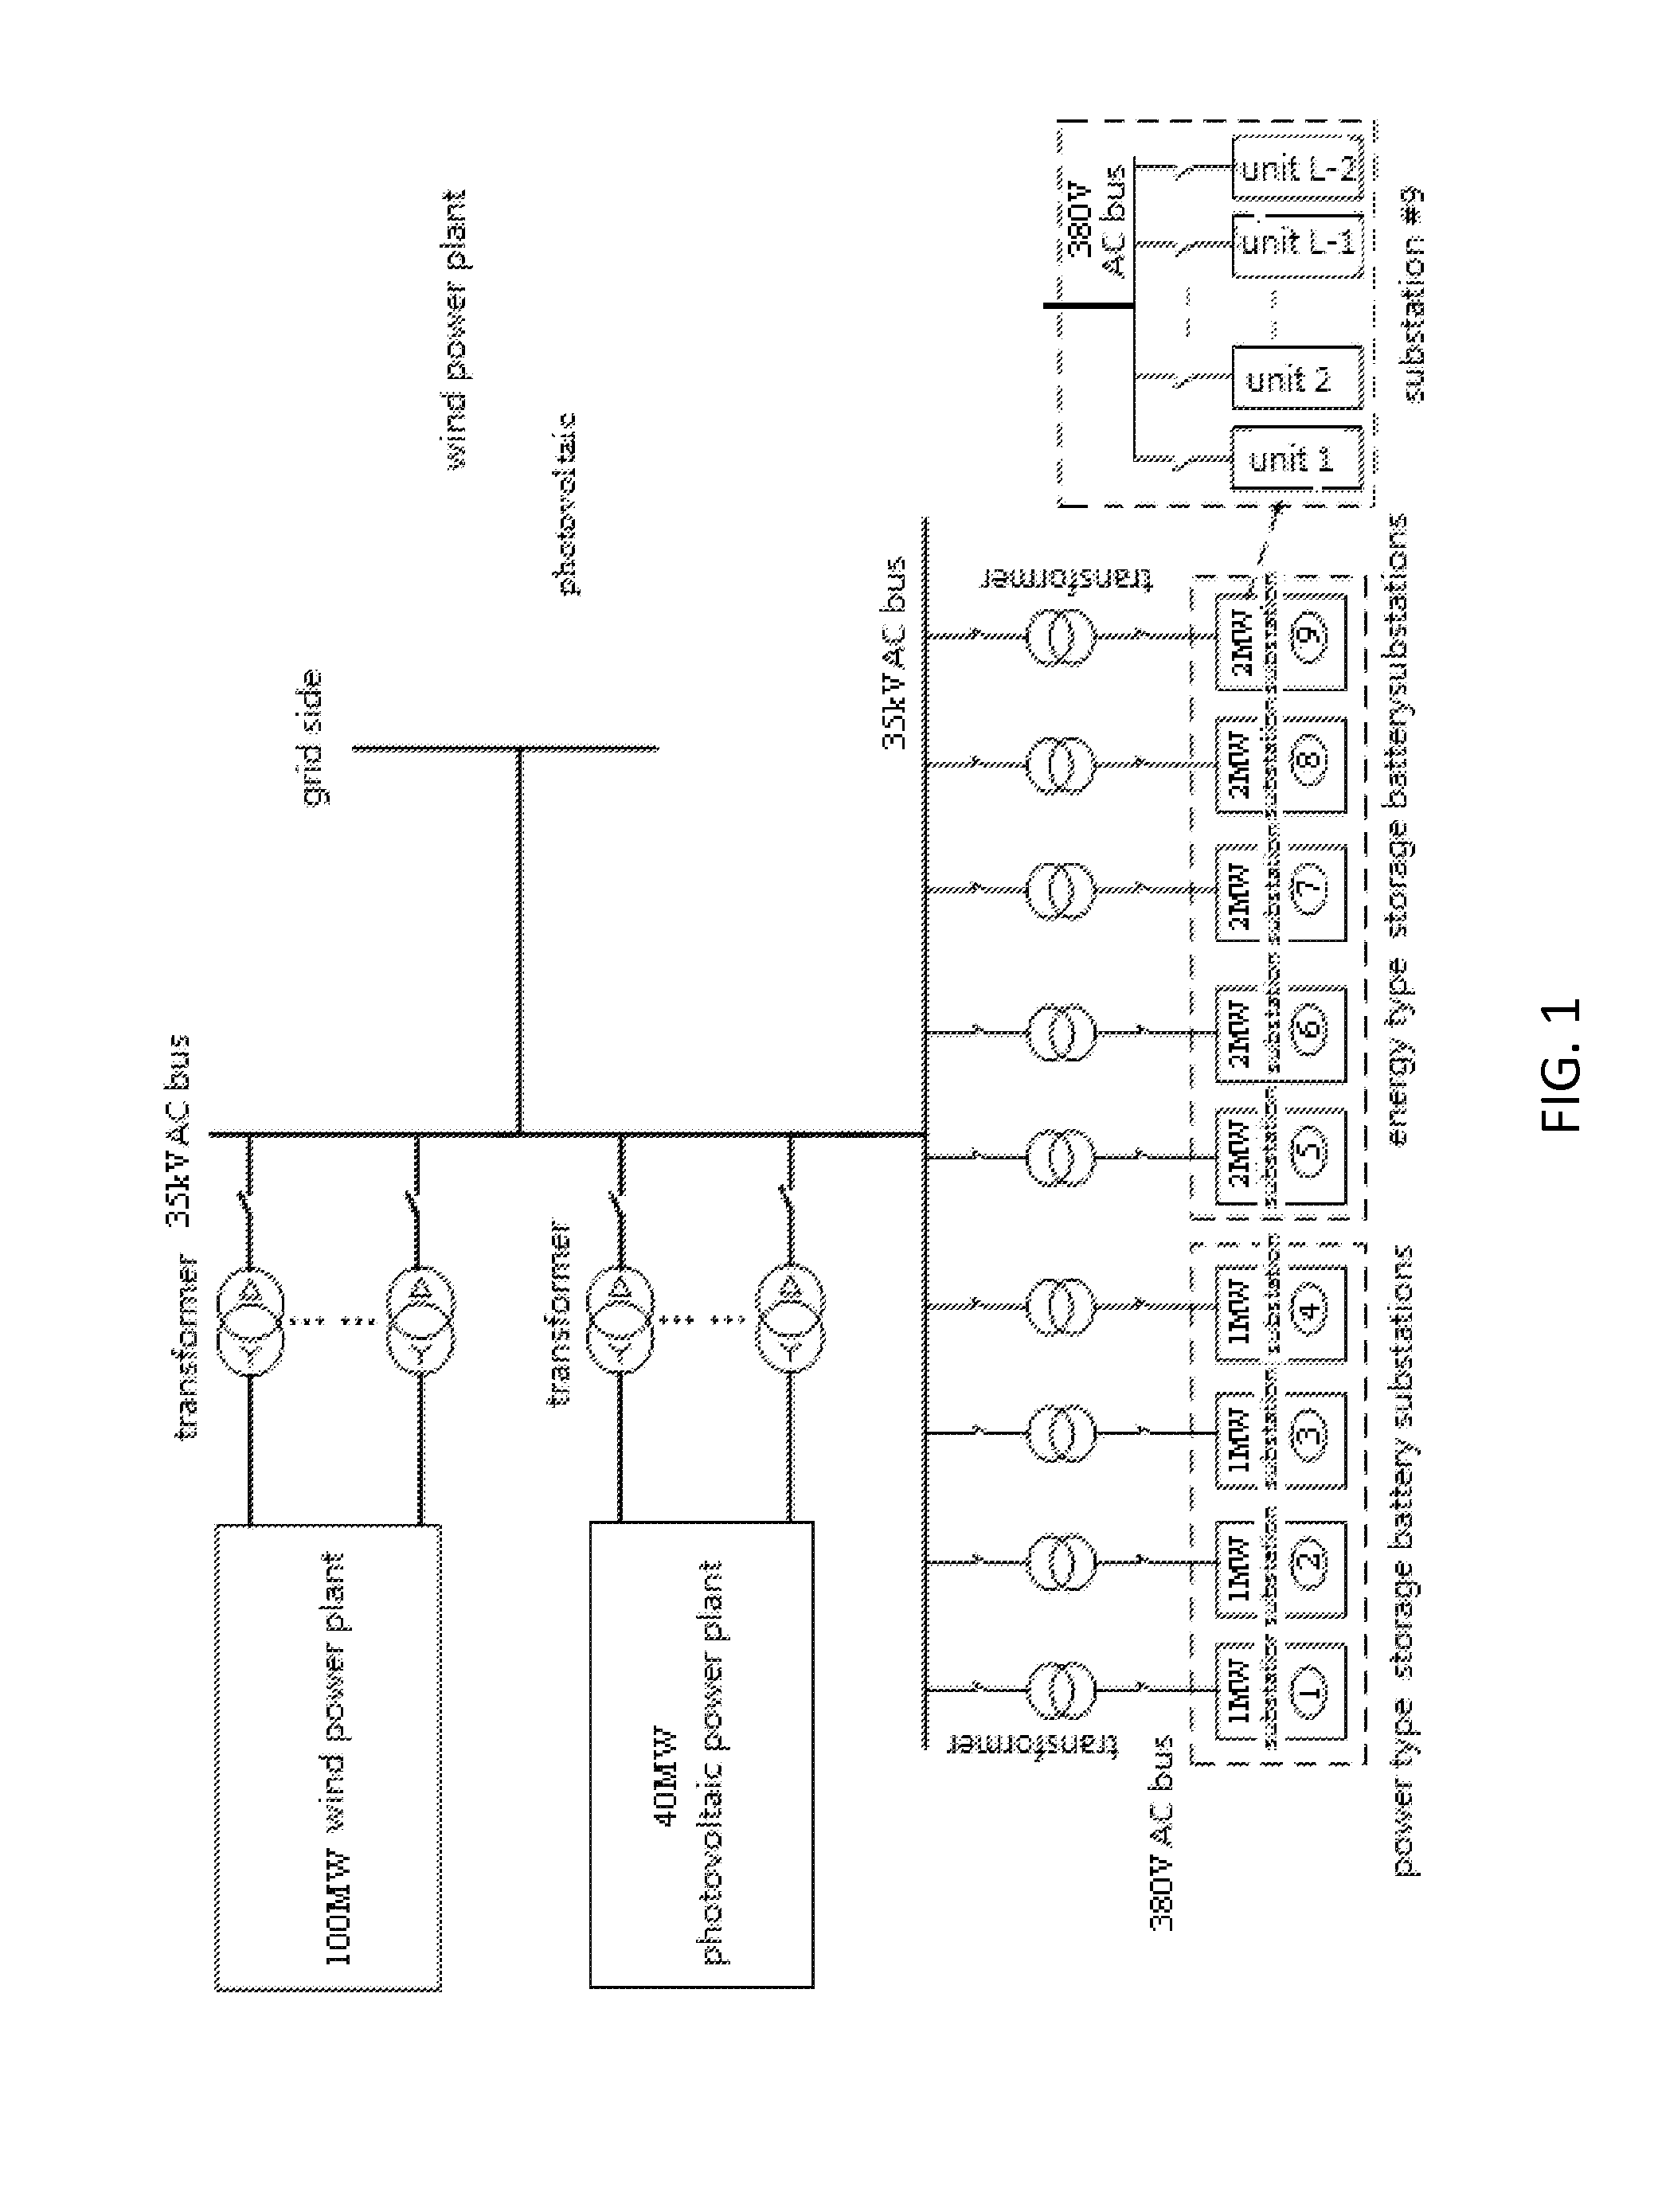 A monitoring system and method for megawatt level battery energy storage power plant